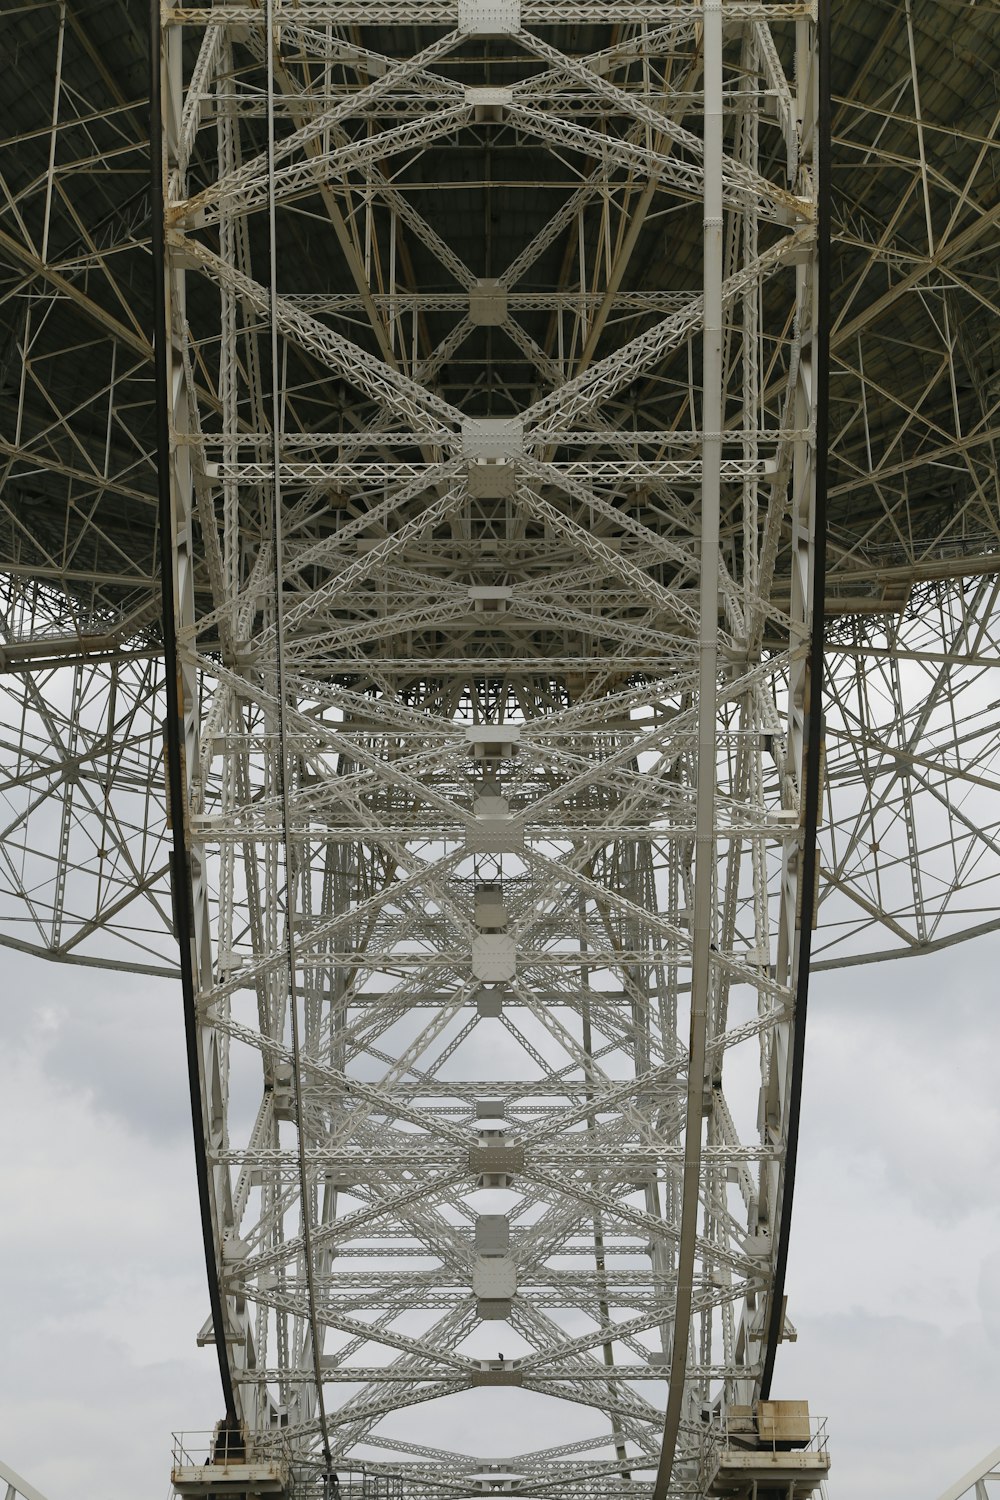 the underside of a large metal structure under a cloudy sky